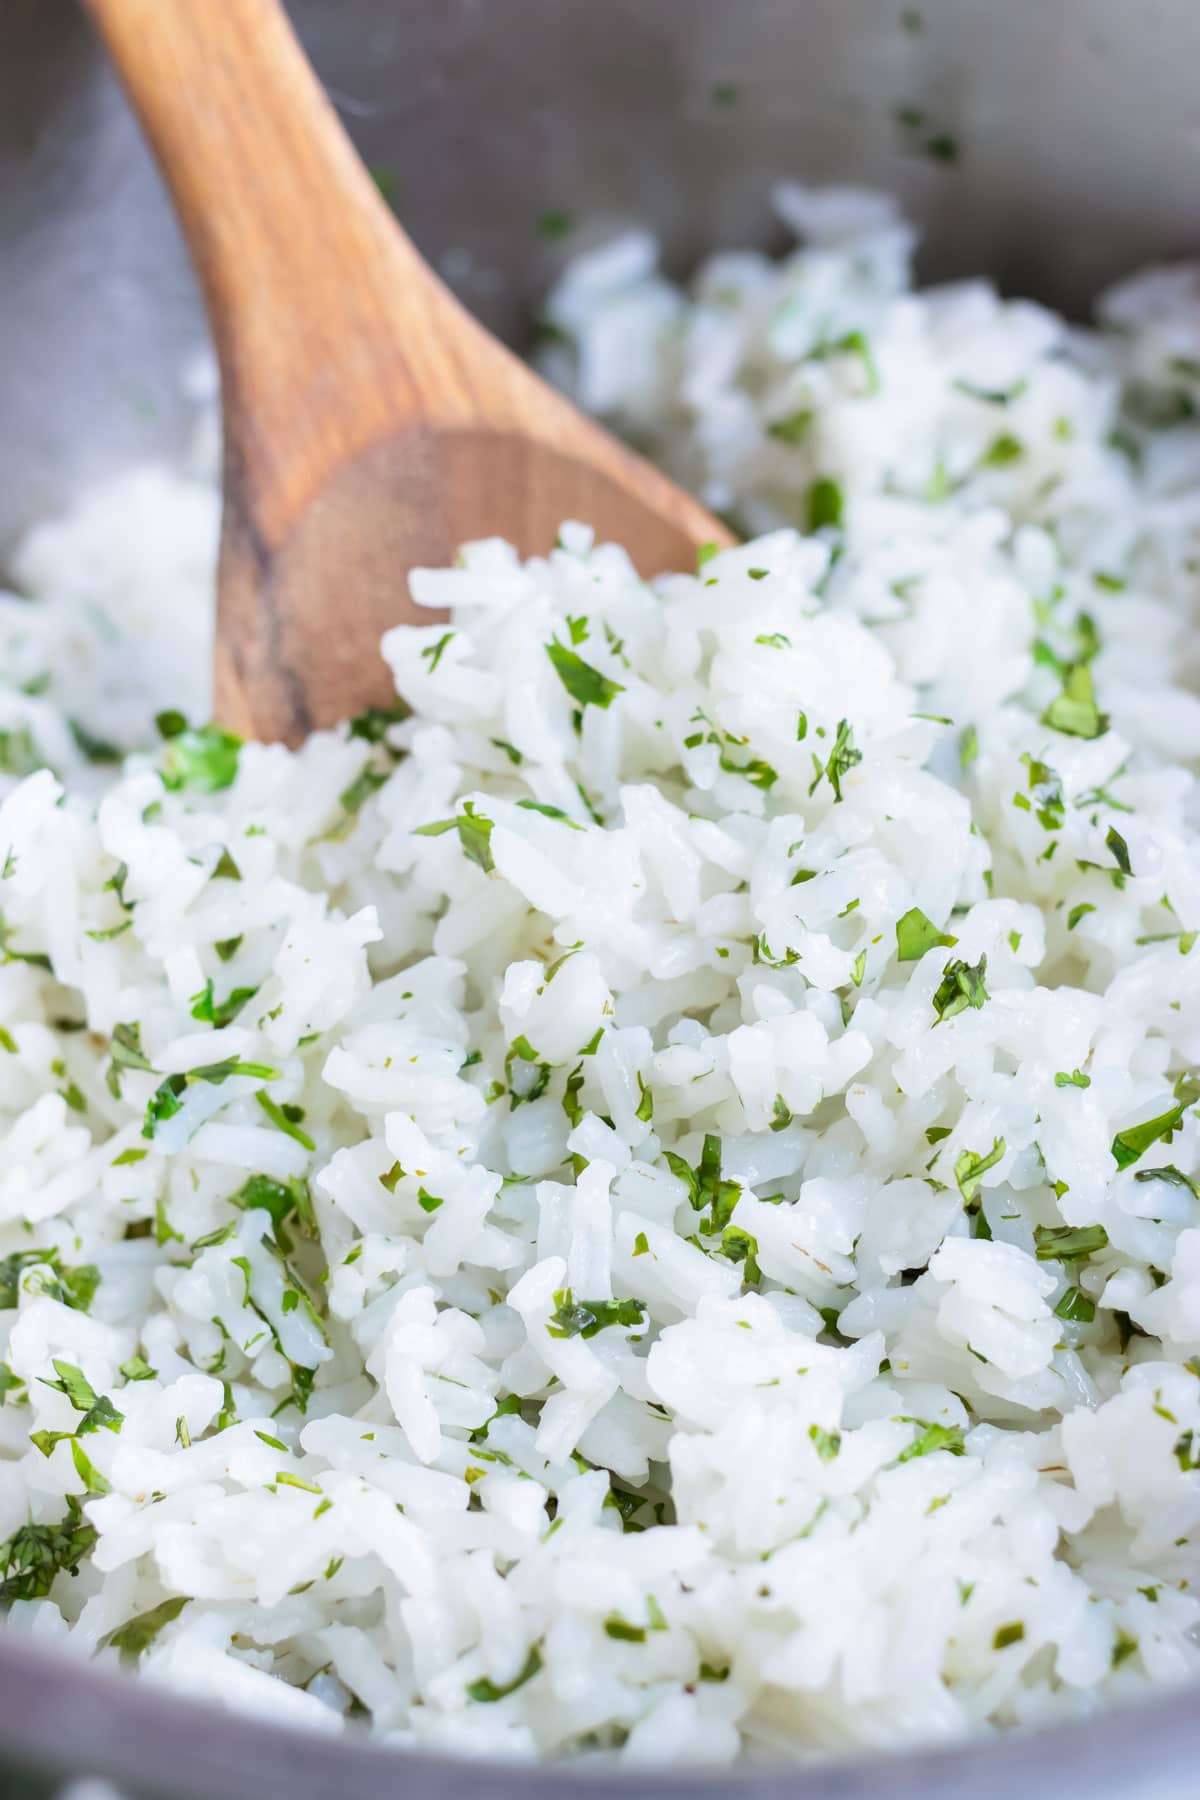 Flavorful cilantro lime rice is served with a spoon for a side dish.